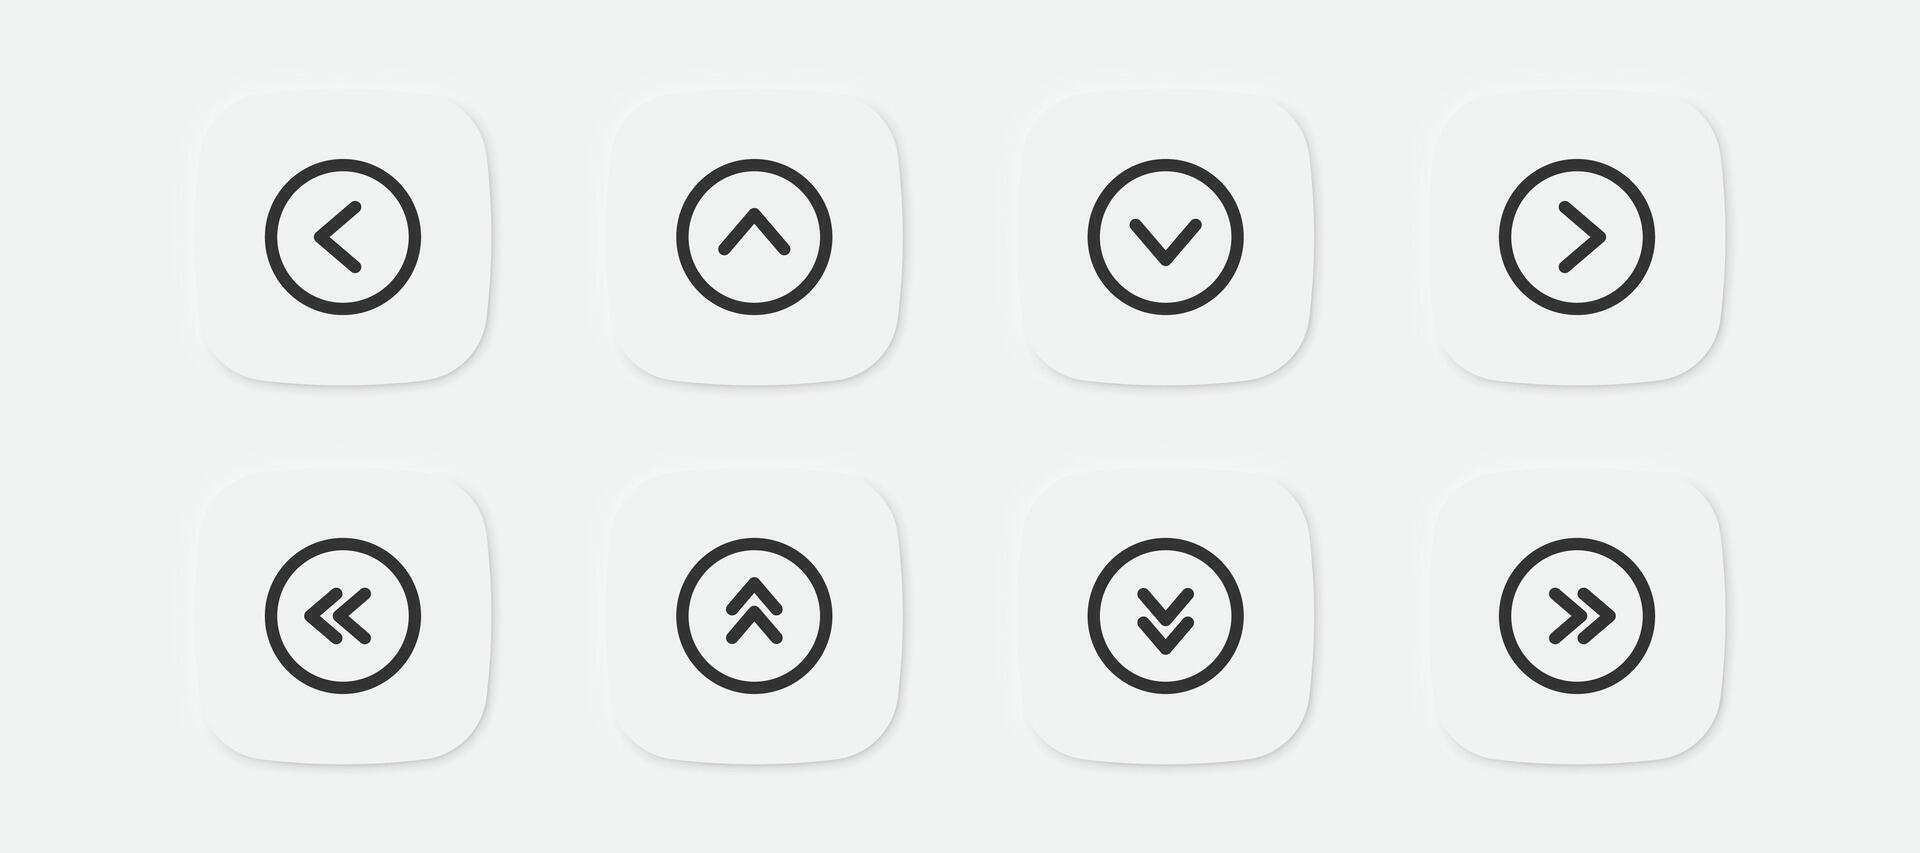 Arrow icon. Left, right, up, down signs. Forward in the square and circle symbol. Acceleration icons. Vector isolated sign.